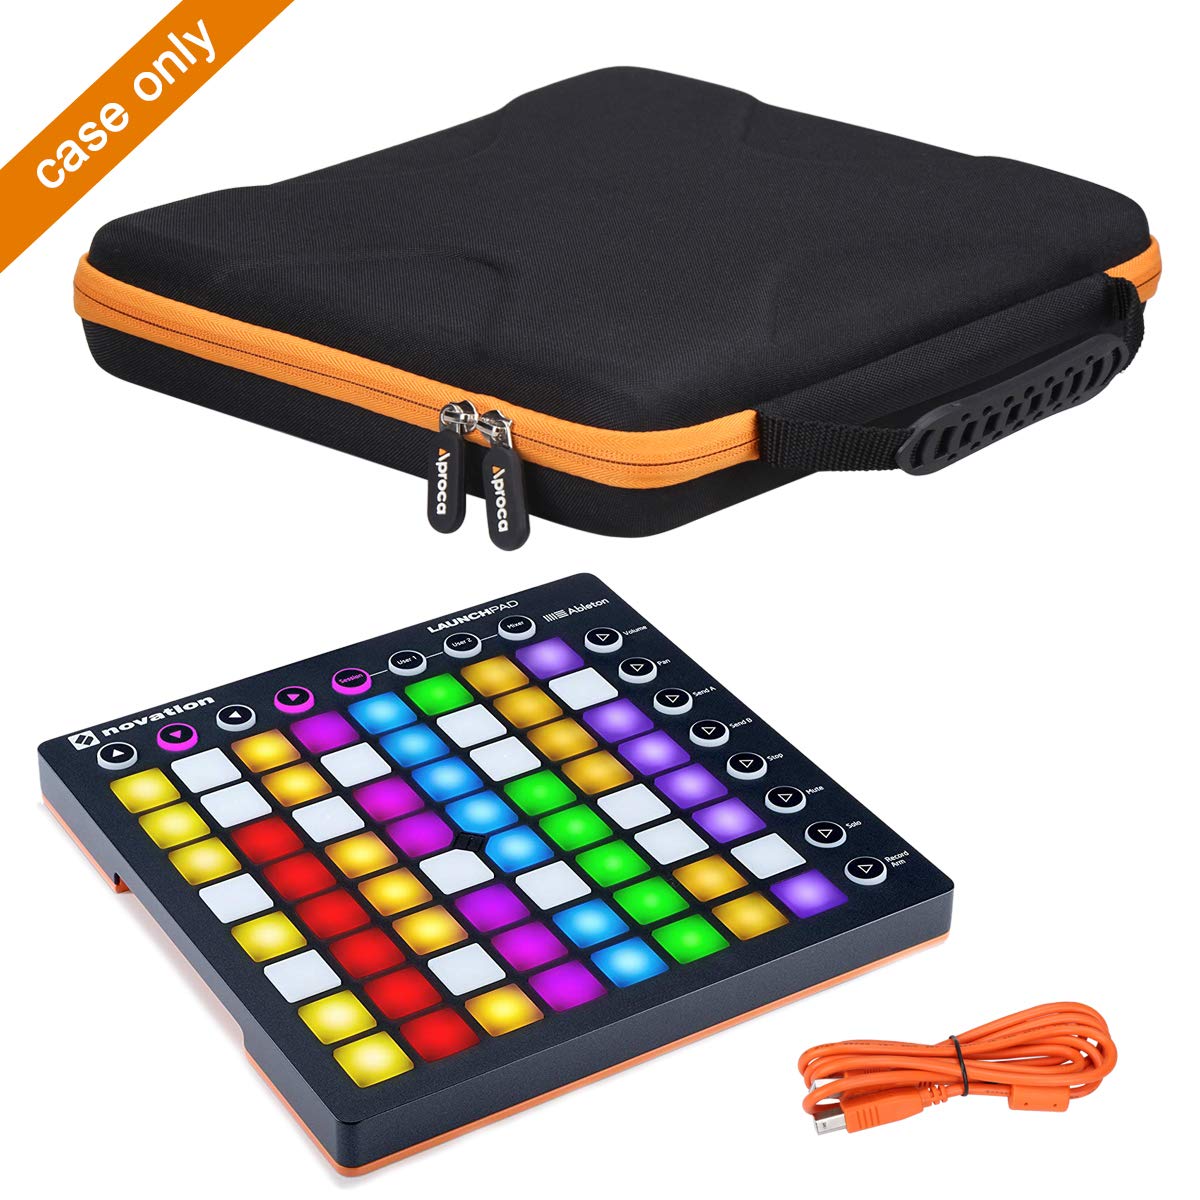 Aproca Hard Carry Travel Case For Novation Launchpad MK2 Ableton Live Controller